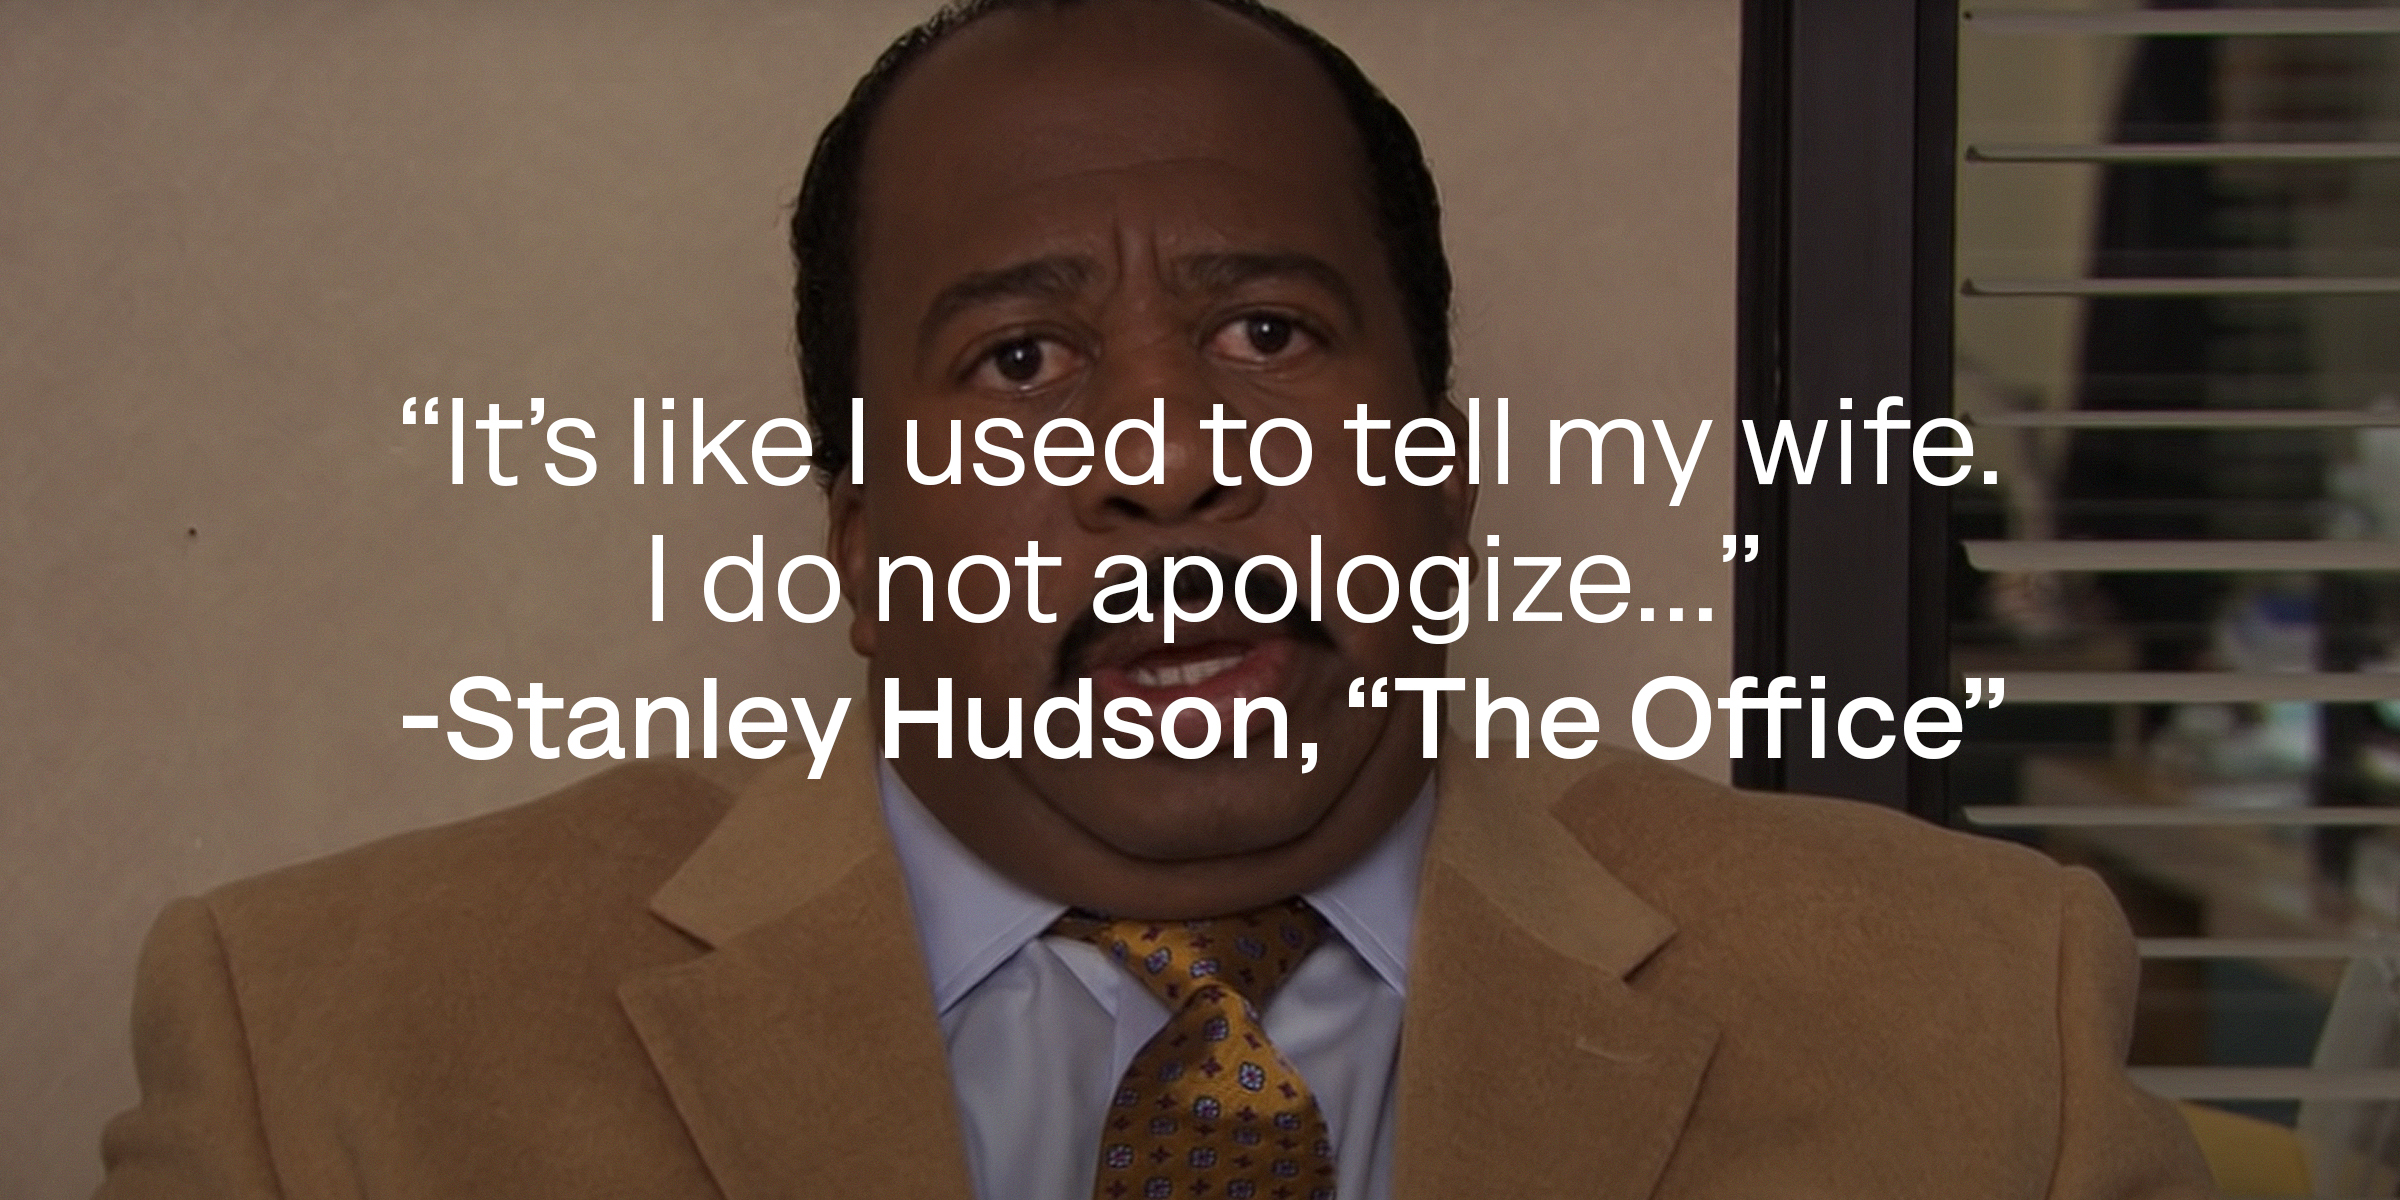 Image of Leslie David Baker as Stanley Hudson in "The Office" with the quote: “It’s like I used to tell my wife. I do not apologize...” | Source: youtube.com/The Office